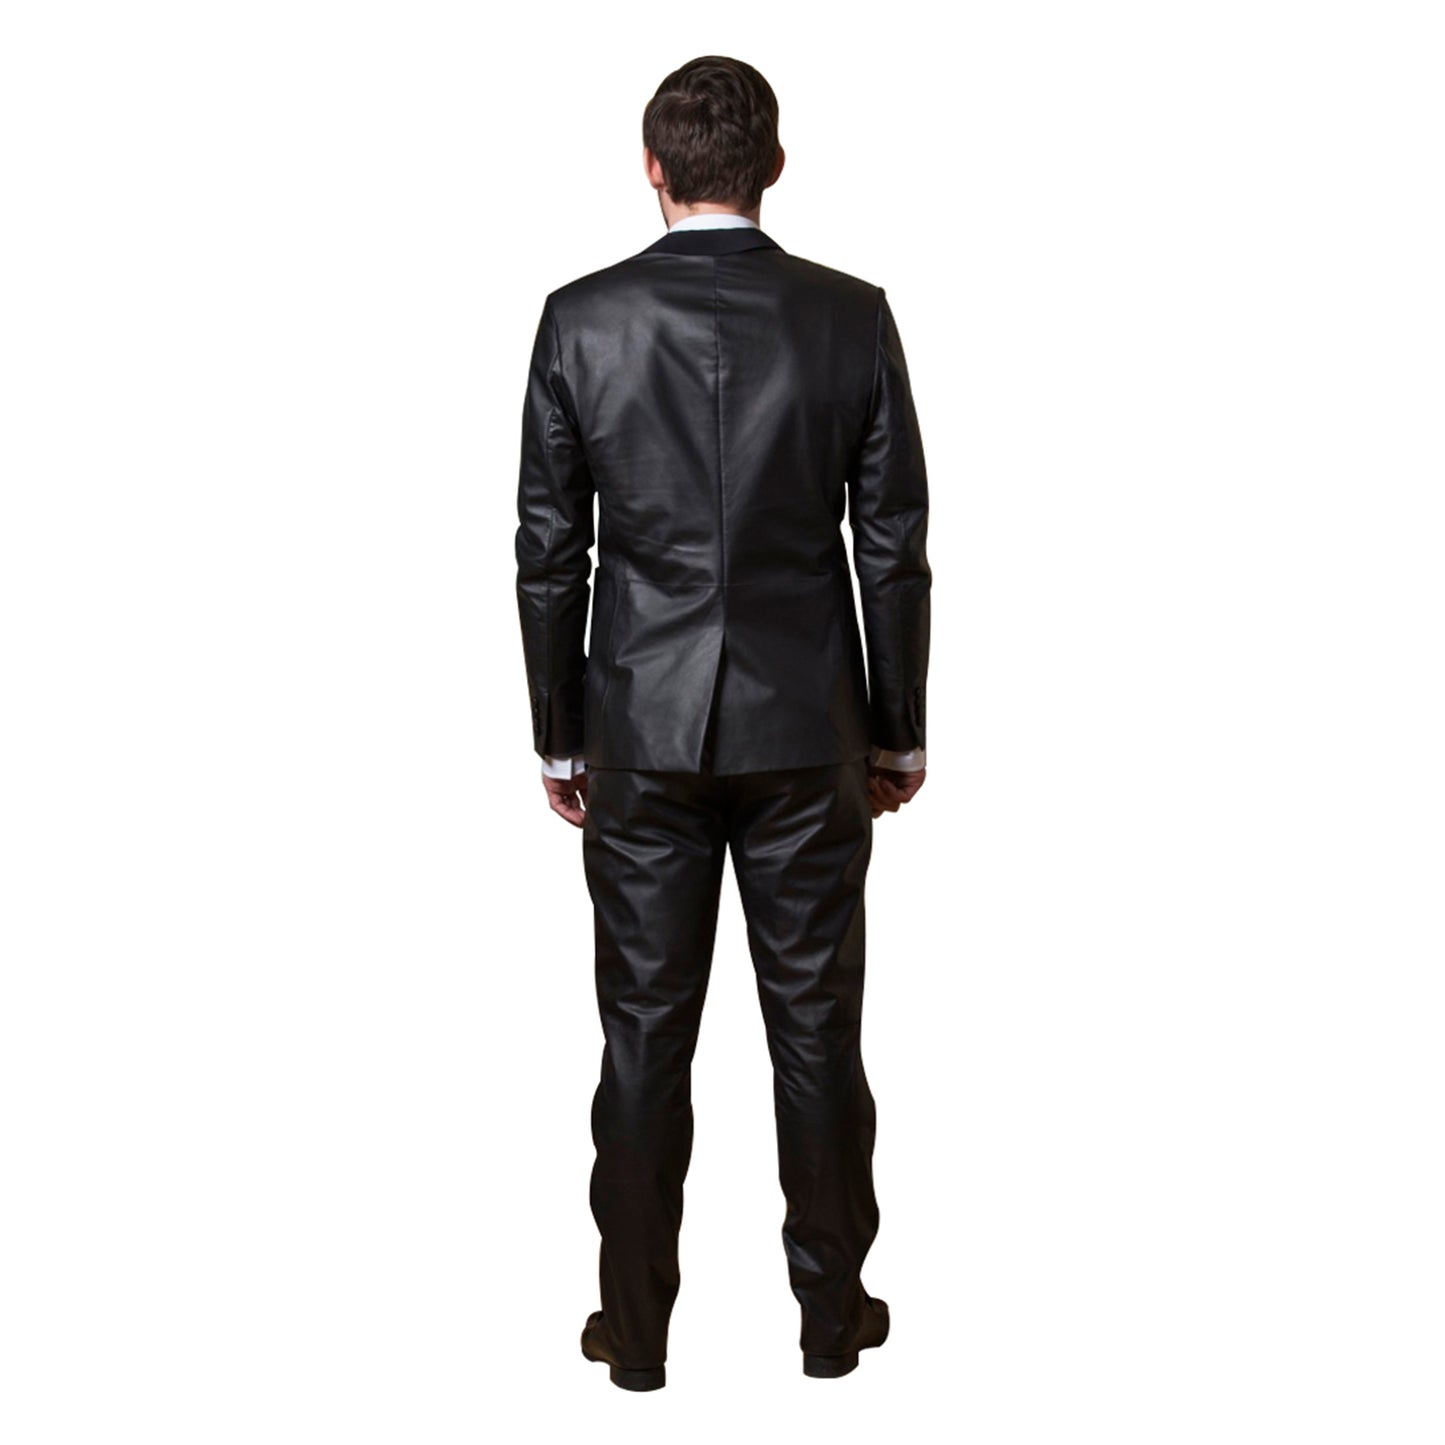 Reindeer Leather Men Suit - Limited Edition